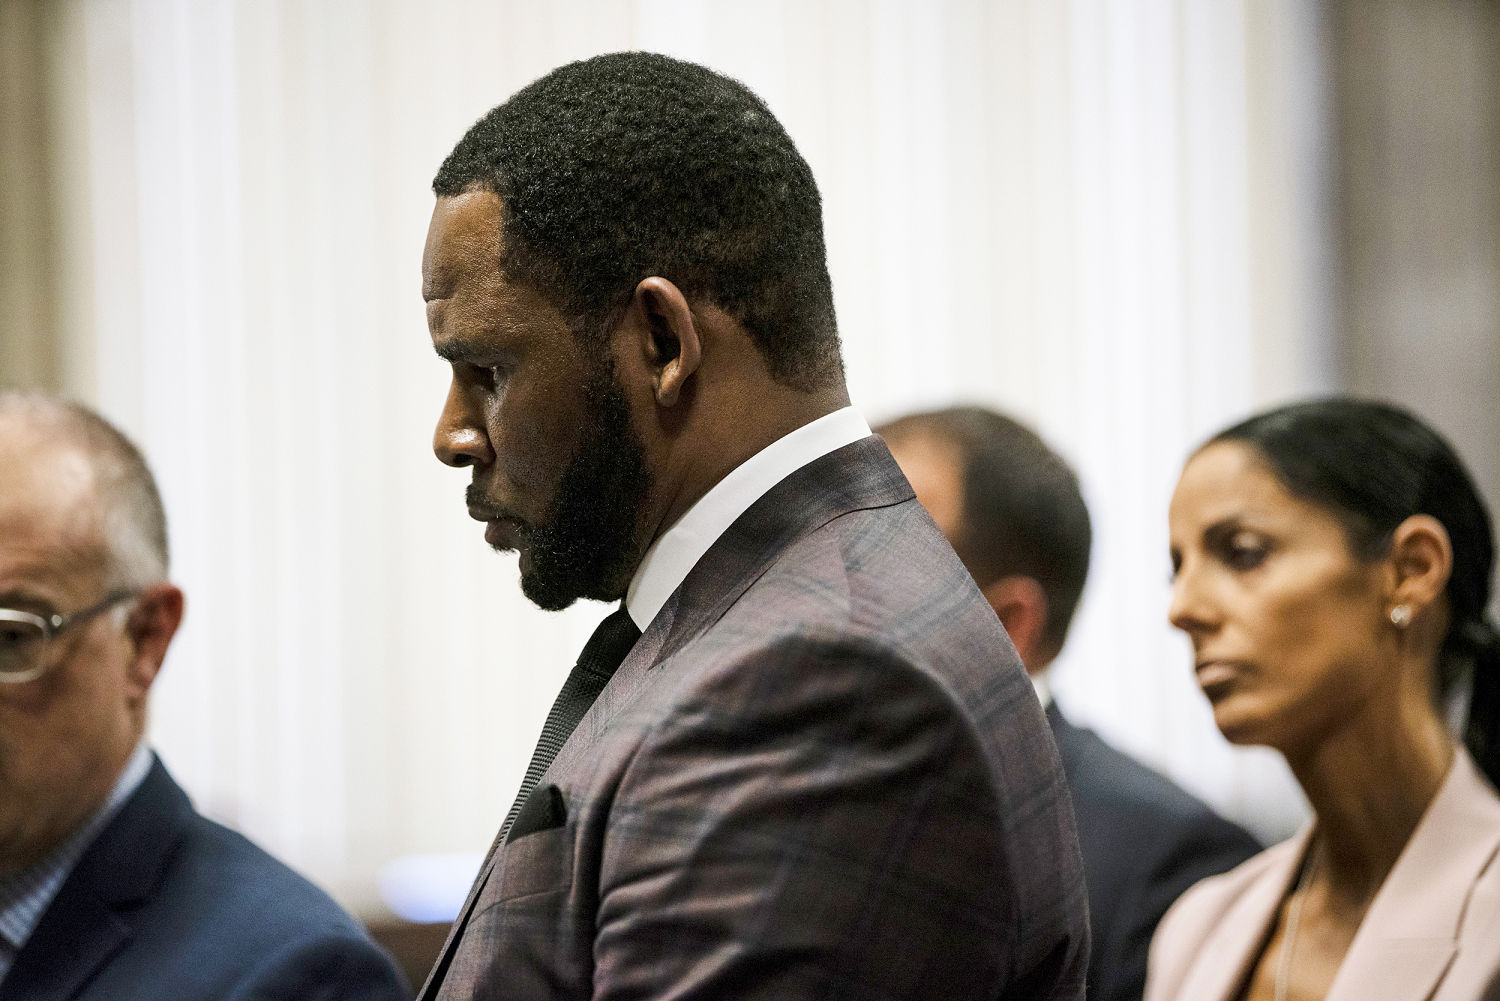 R. Kelly appeals sex crime convictions to U.S. Supreme Court